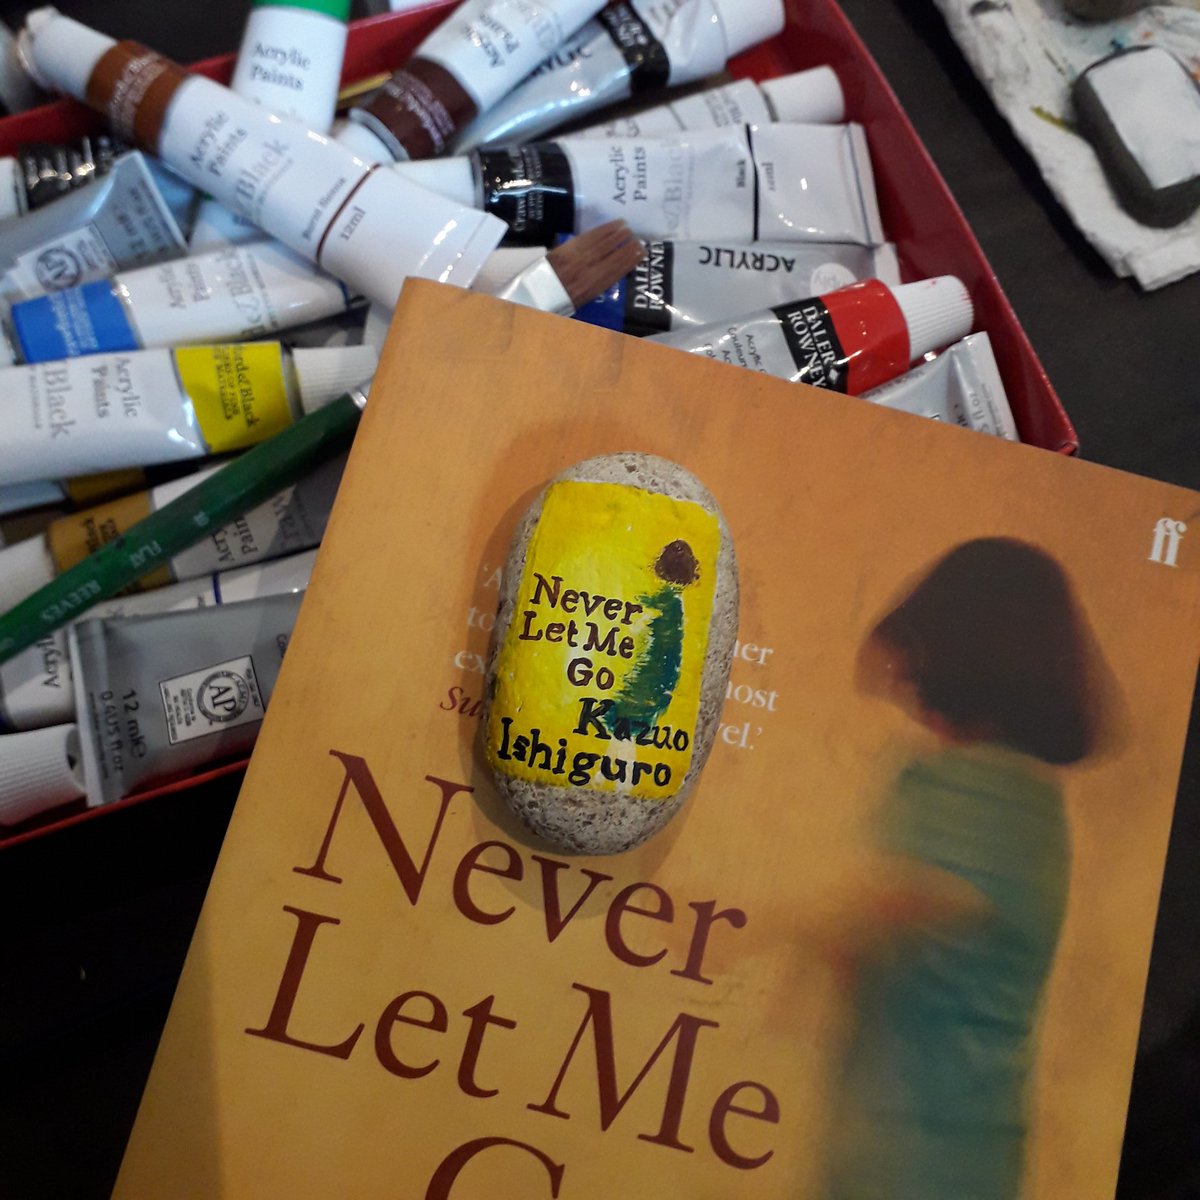 Never Let Me Go by Kazuo Ishiguro painted on a pebble